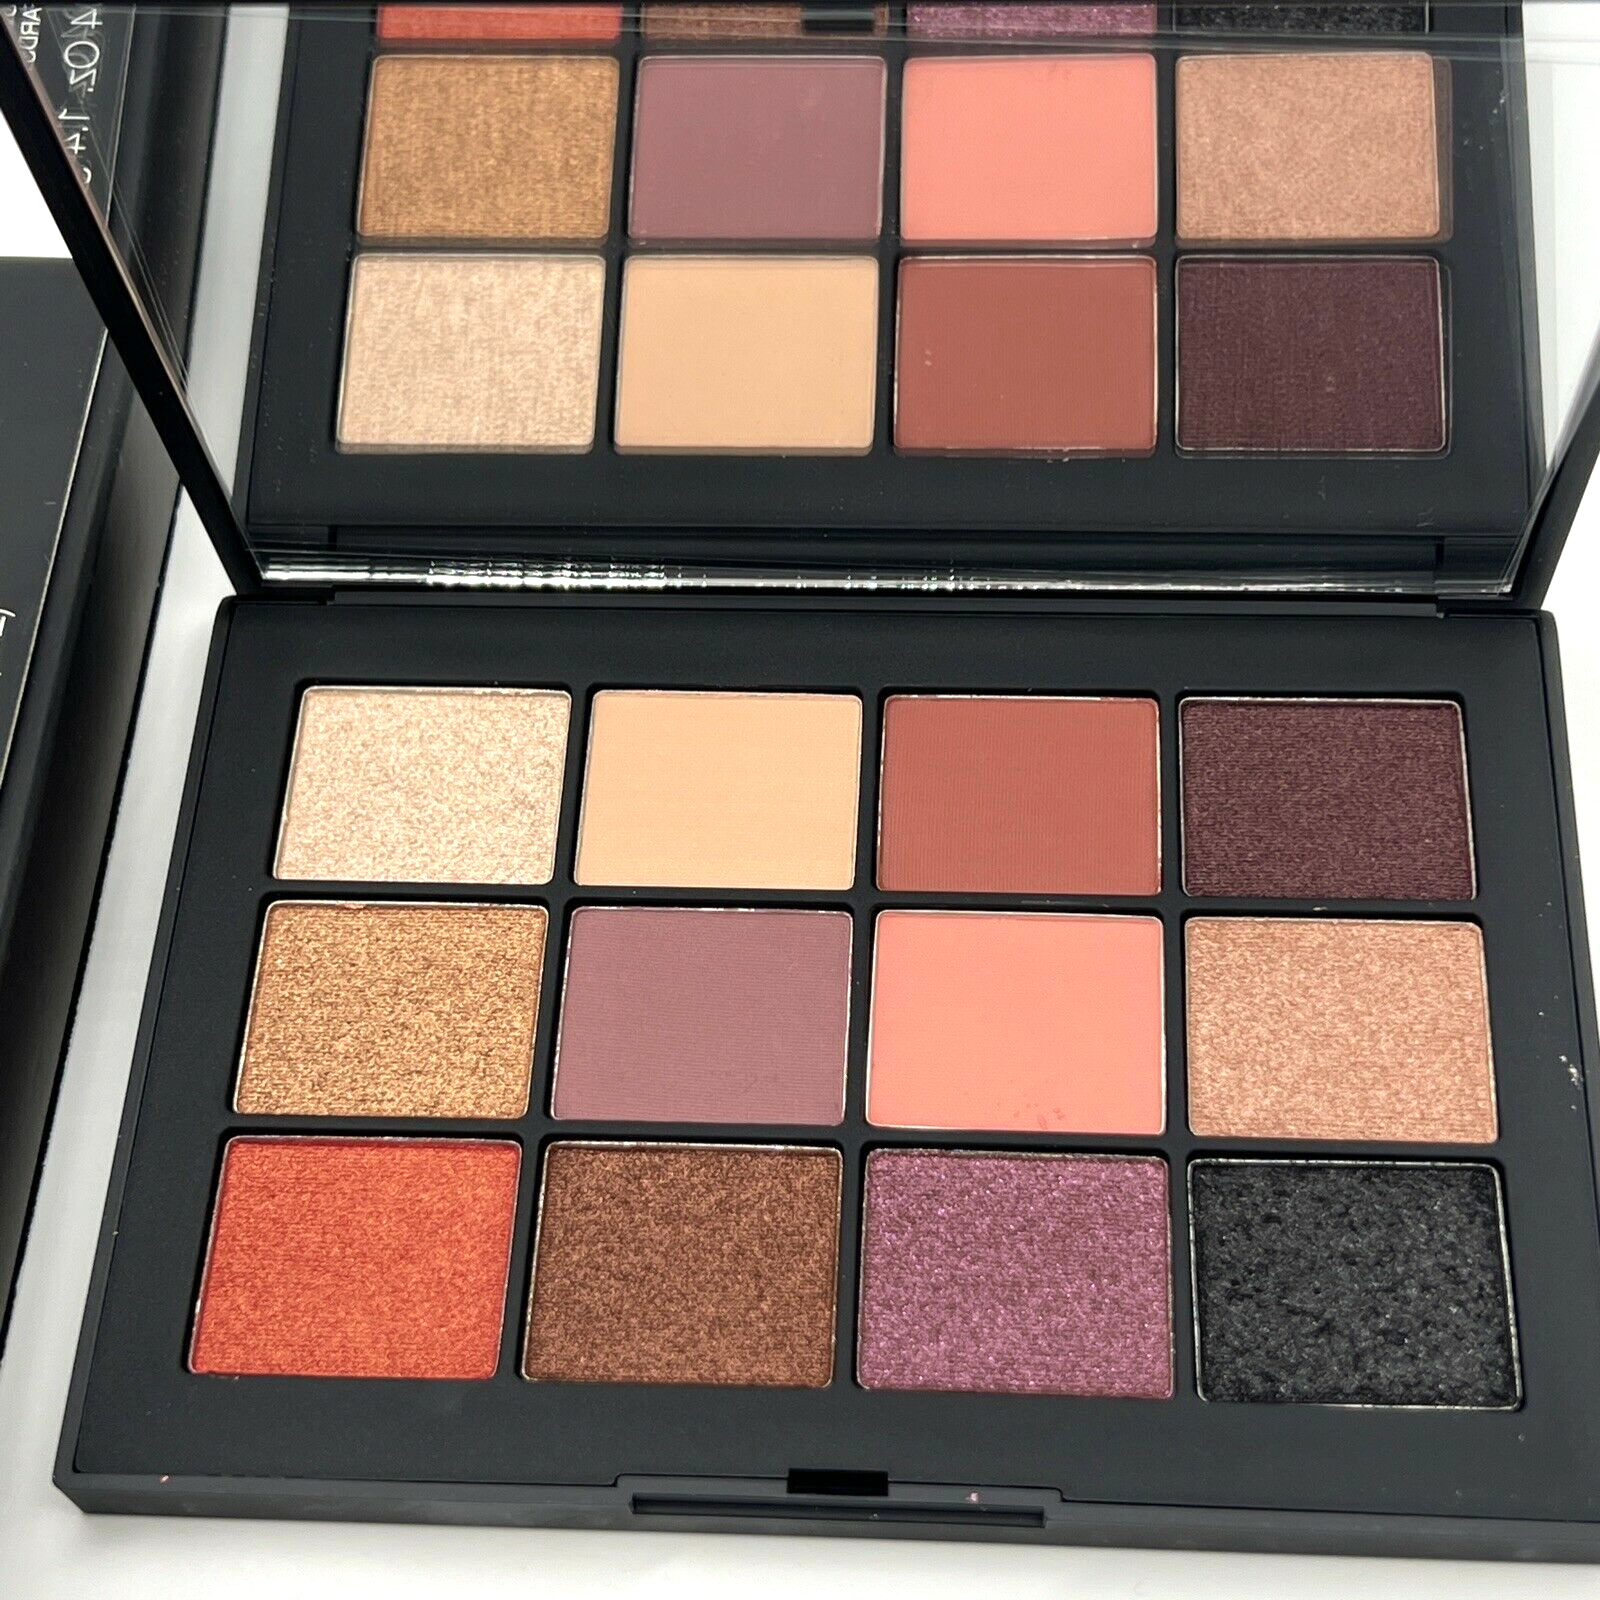 NARS Extreme Effects Limited Edition Eyeshadow Palette 12 x 1.4 grams